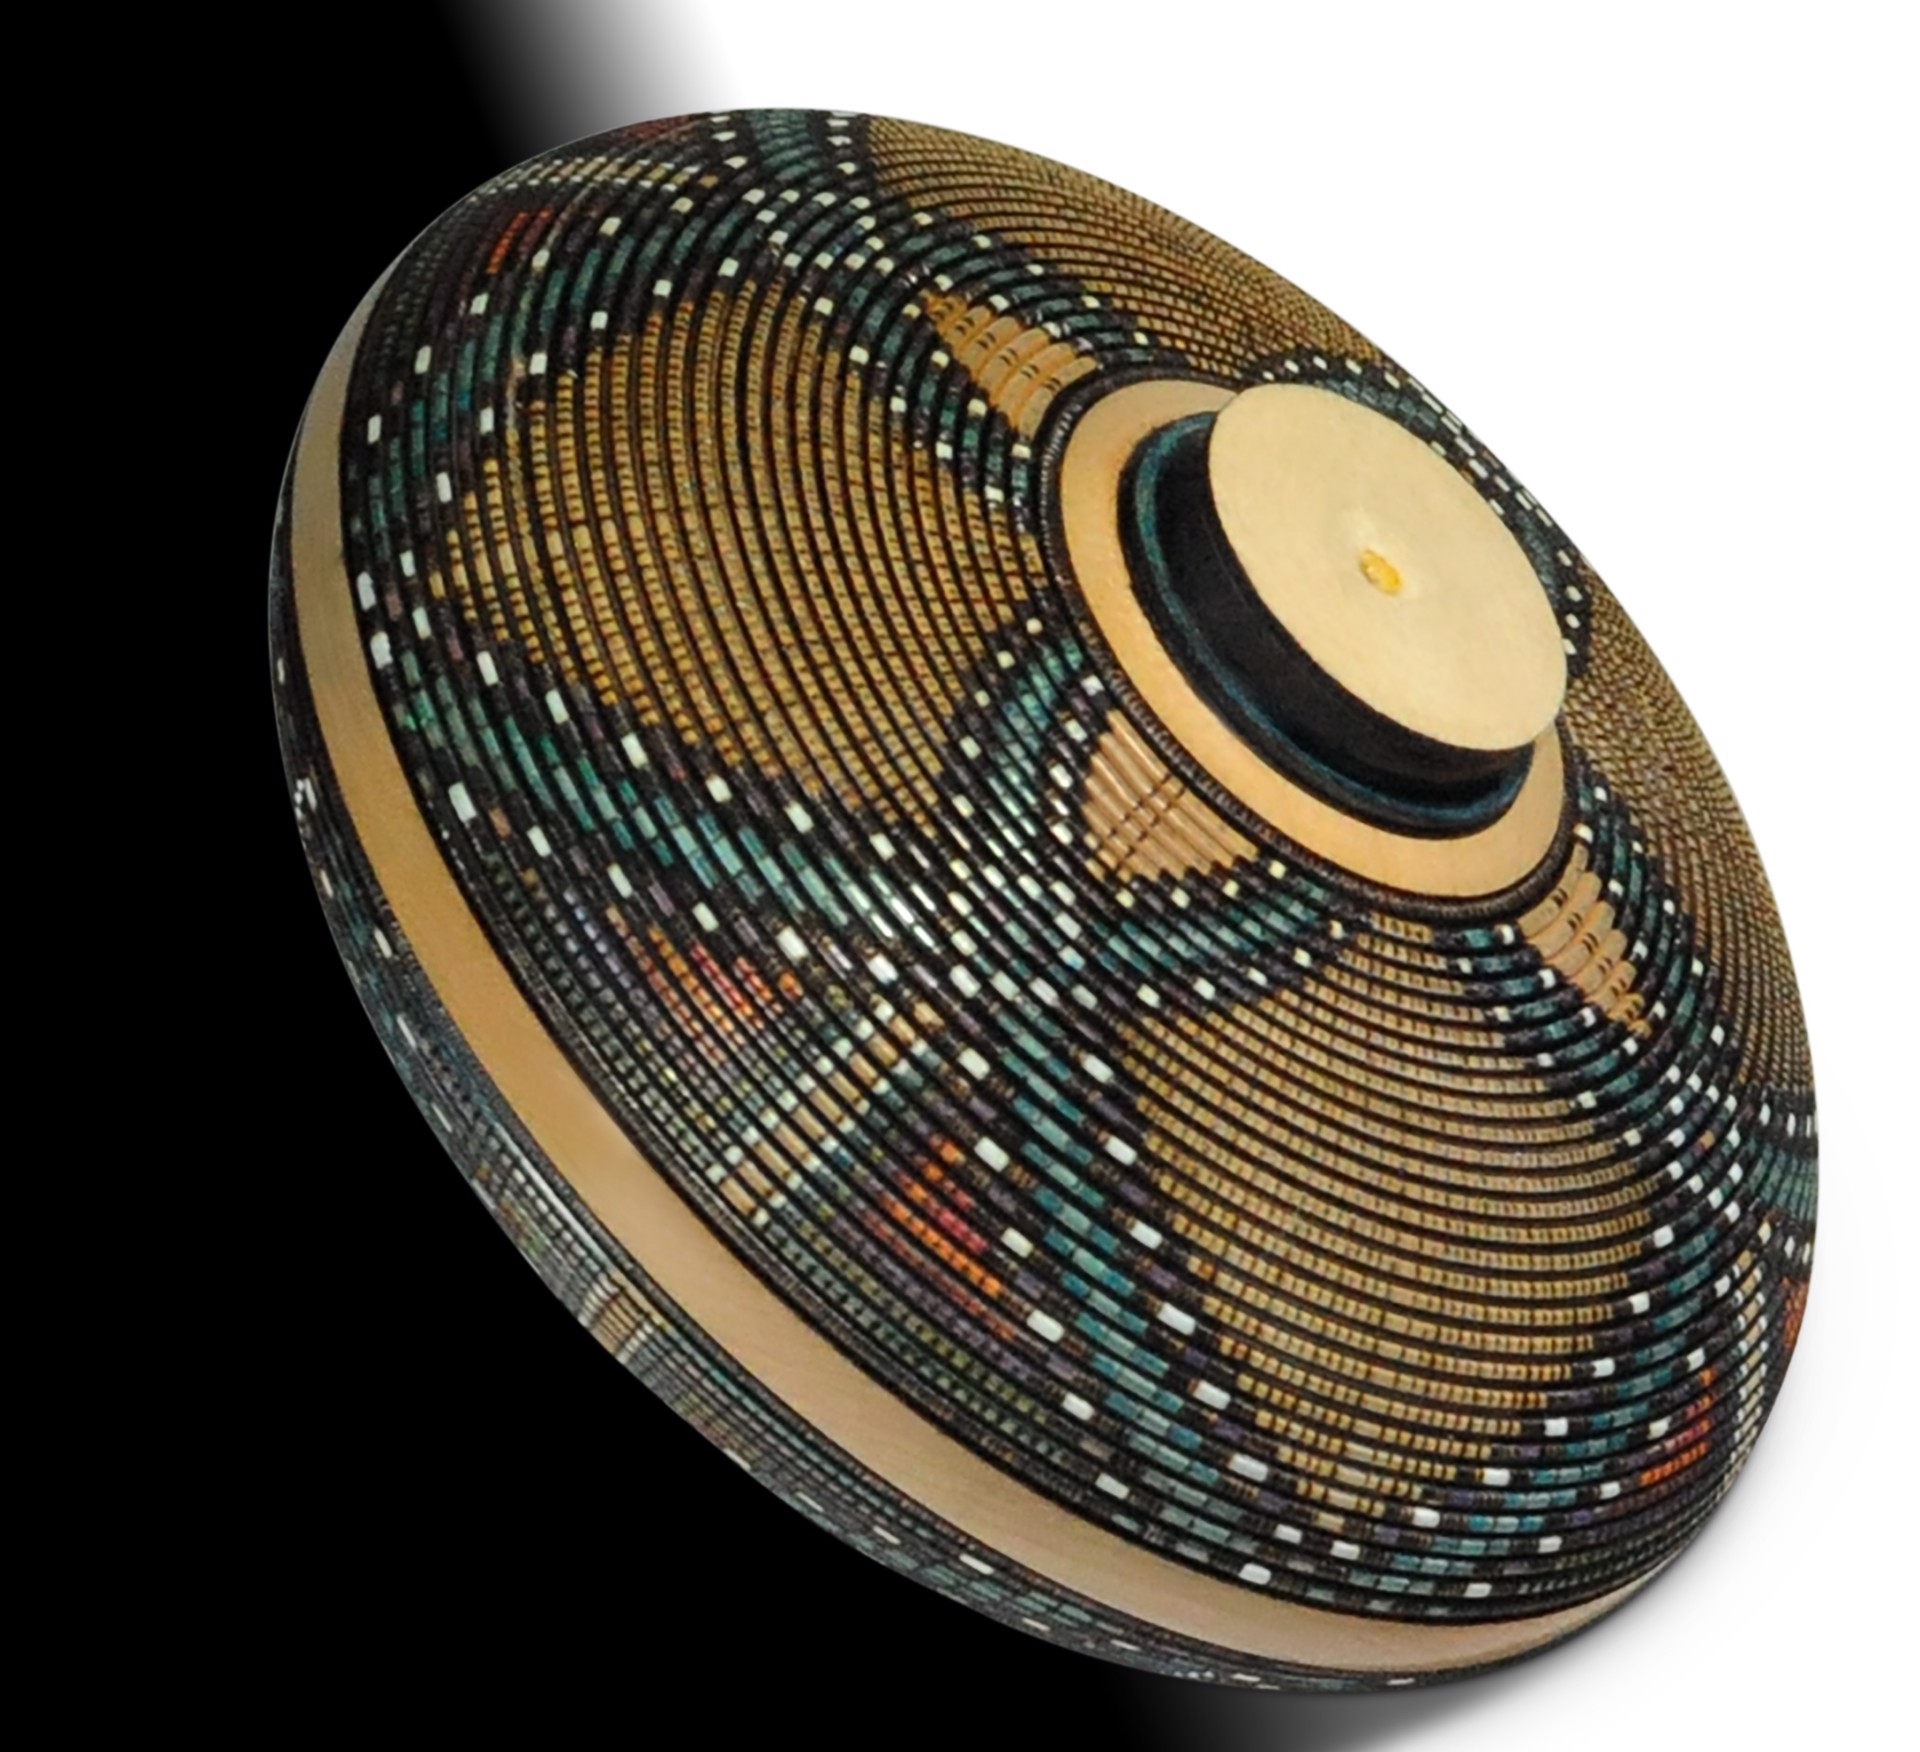 Sipapu 5 with Turquoise Inlay by Keoni